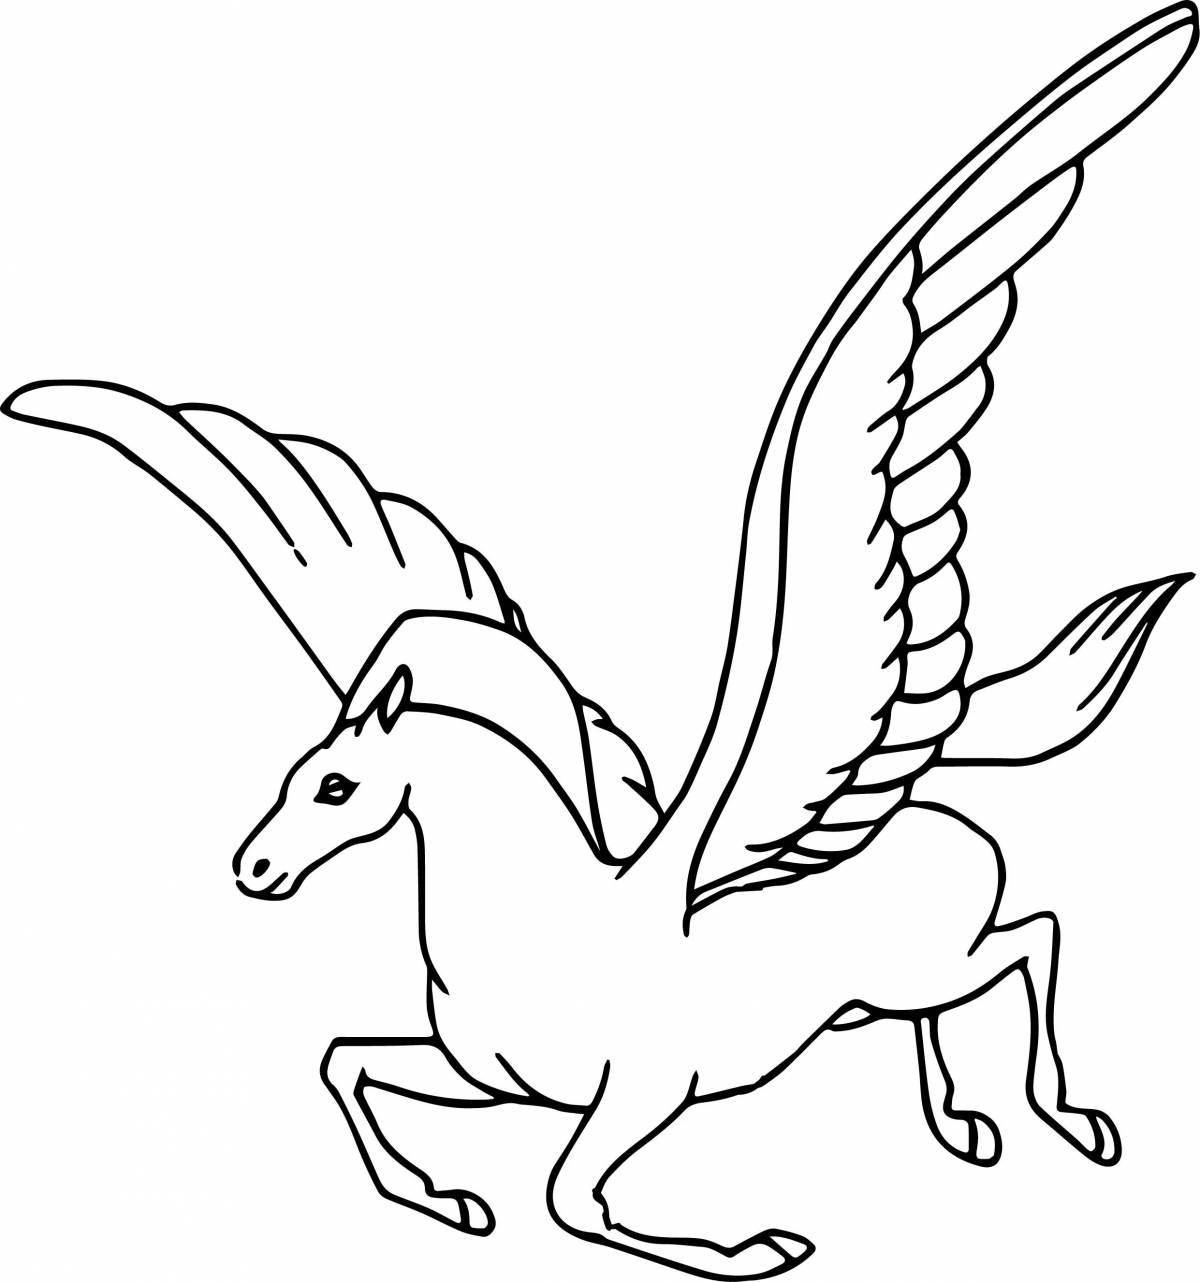 Coloring page exalted horse with wings